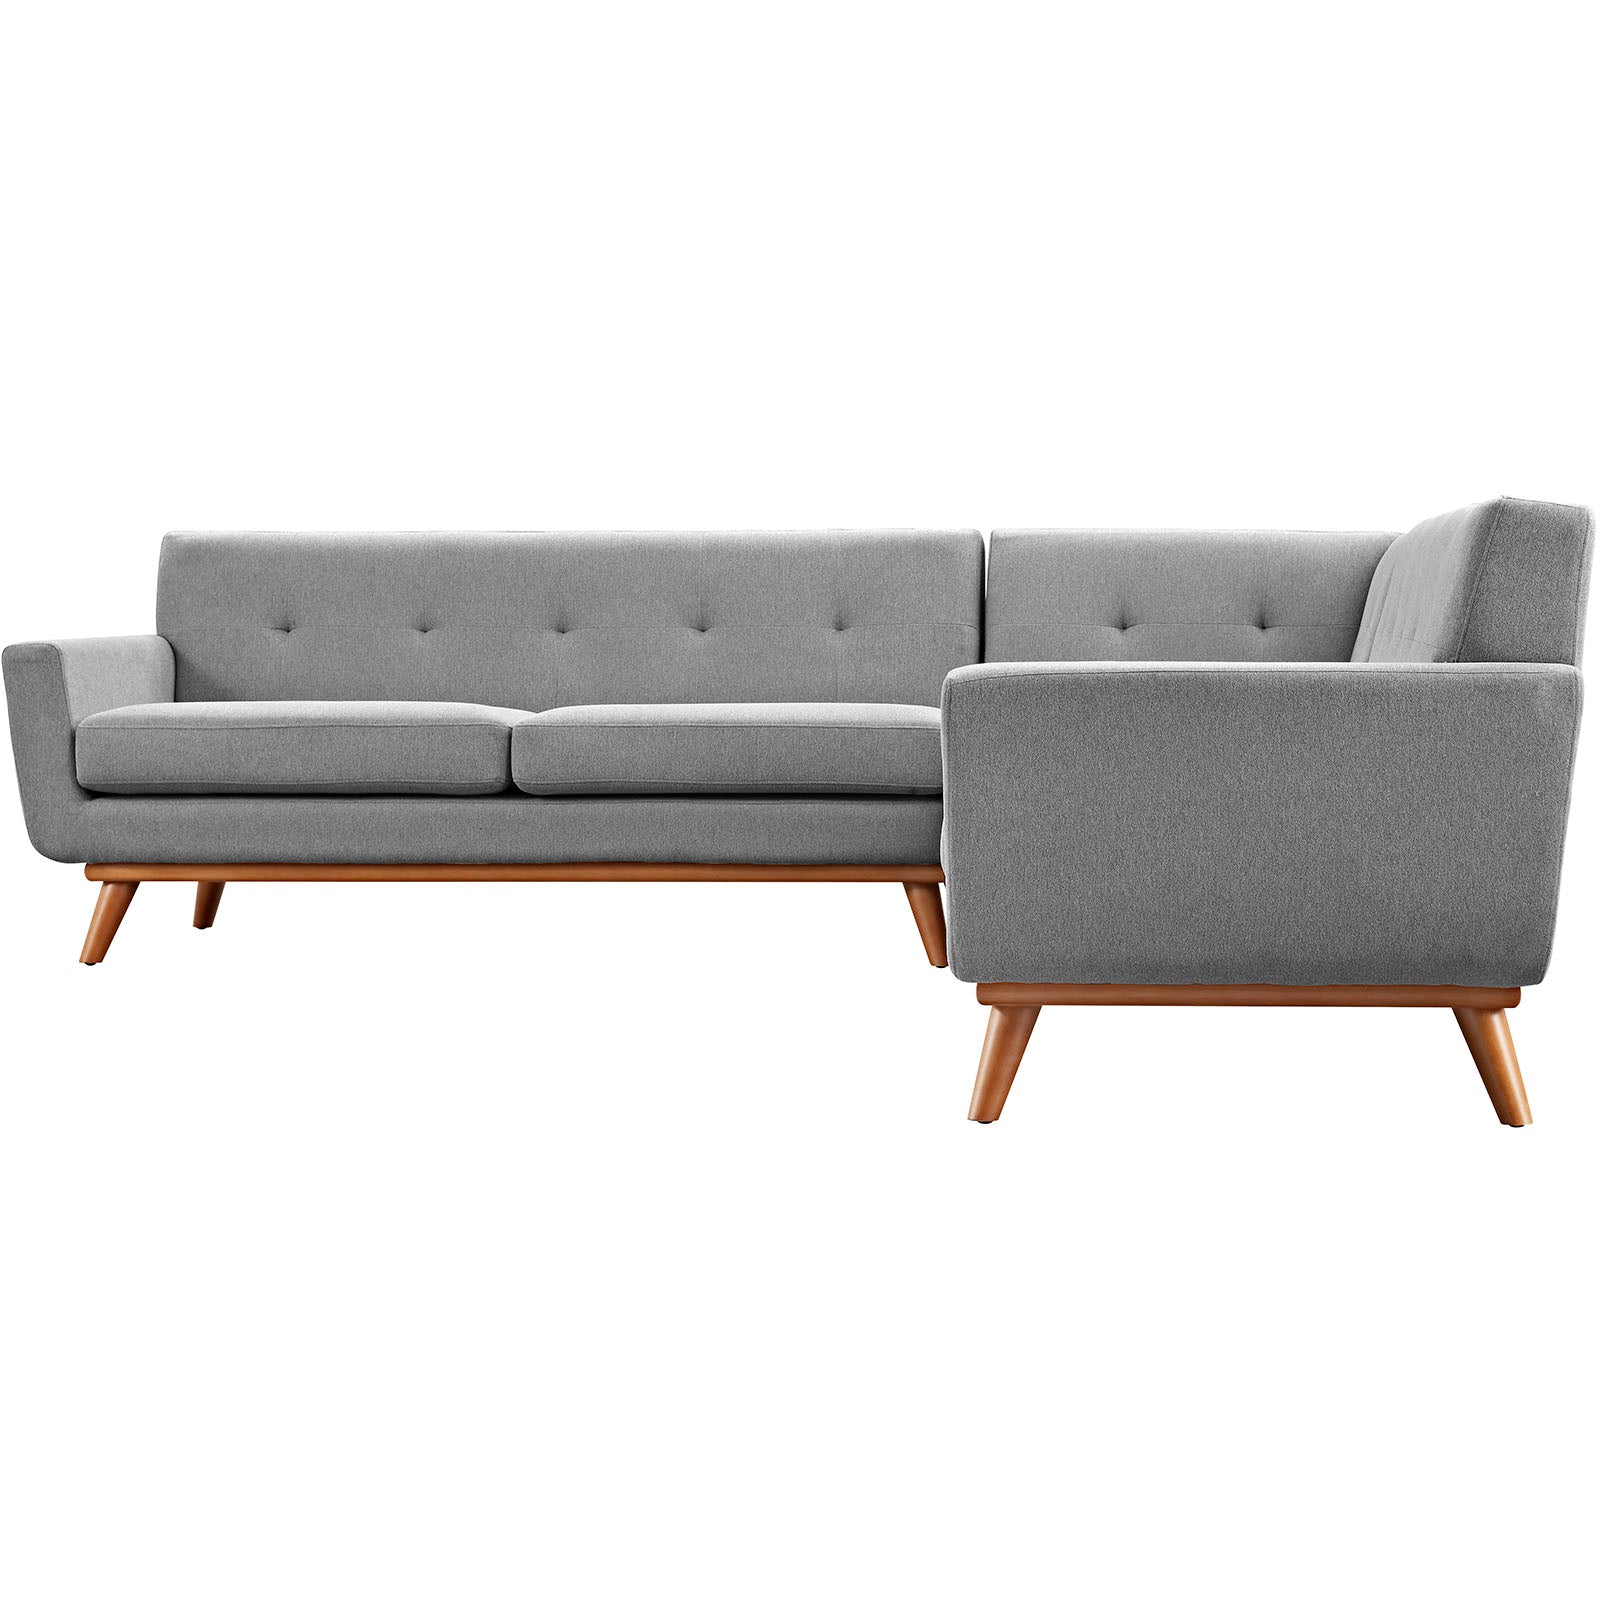 Modway Sectional Sofas - Engage L-Shaped Sectional Sofa Expectation Gray